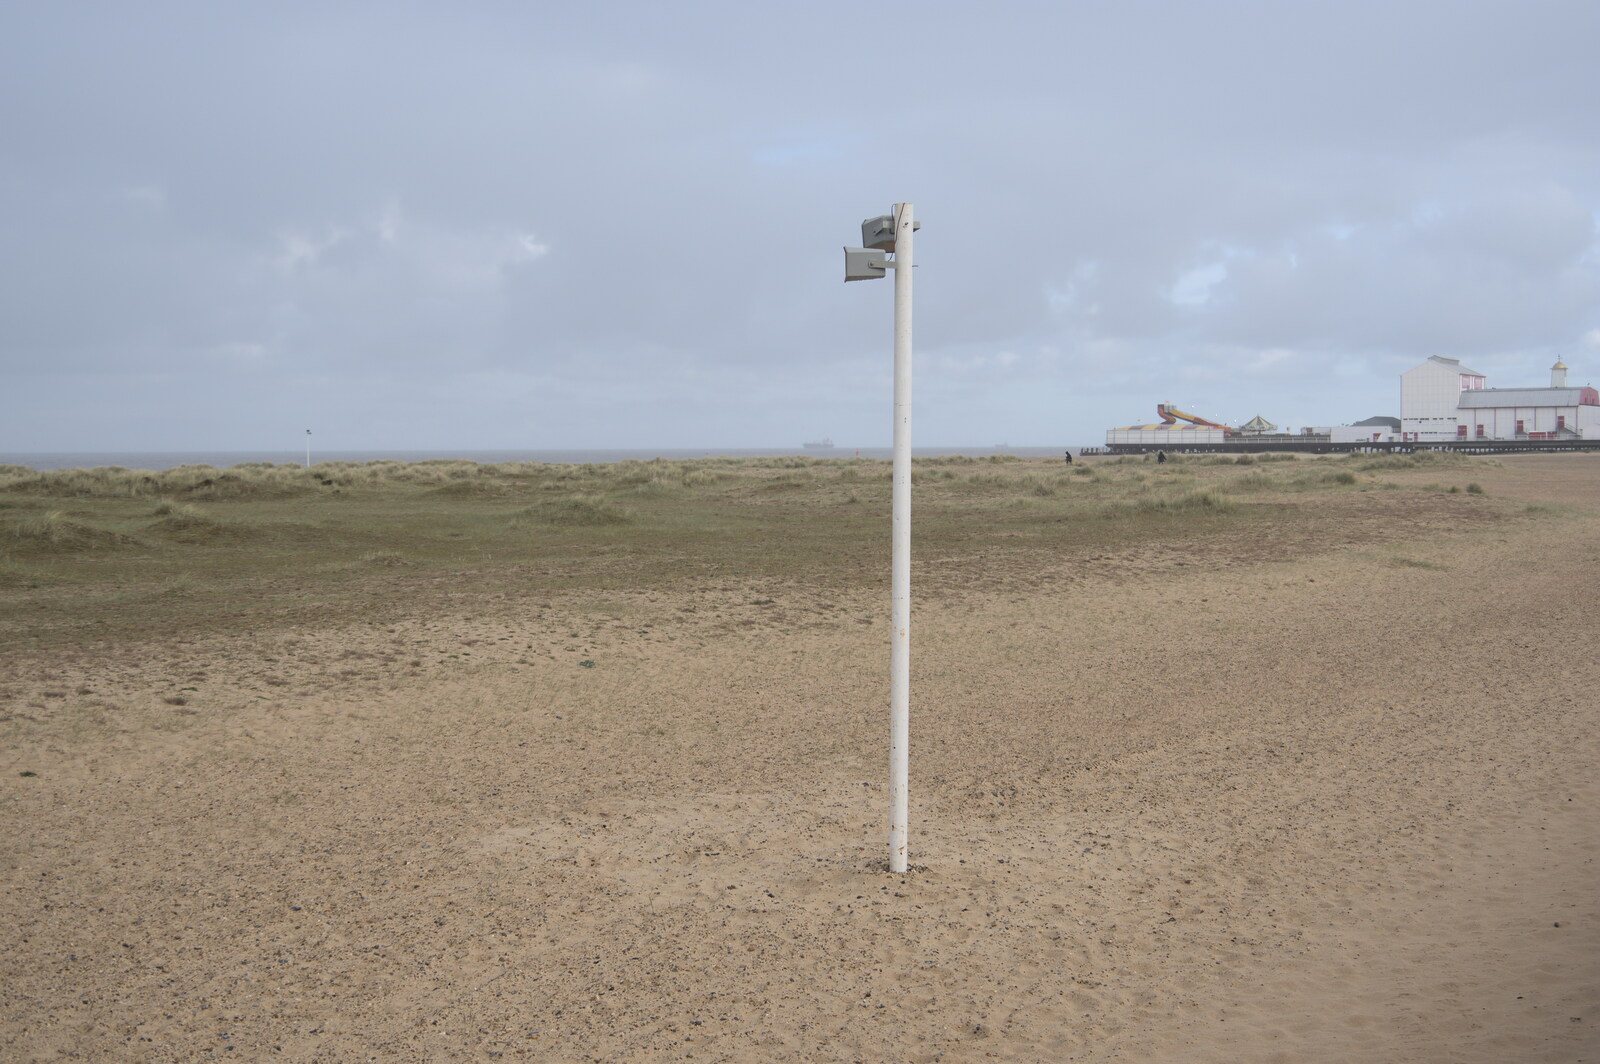 One of the 'Signal on Sea' speakers from Faded Seaside Glamour: A Weekend in Great Yarmouth, Norfolk - 29th May 2022